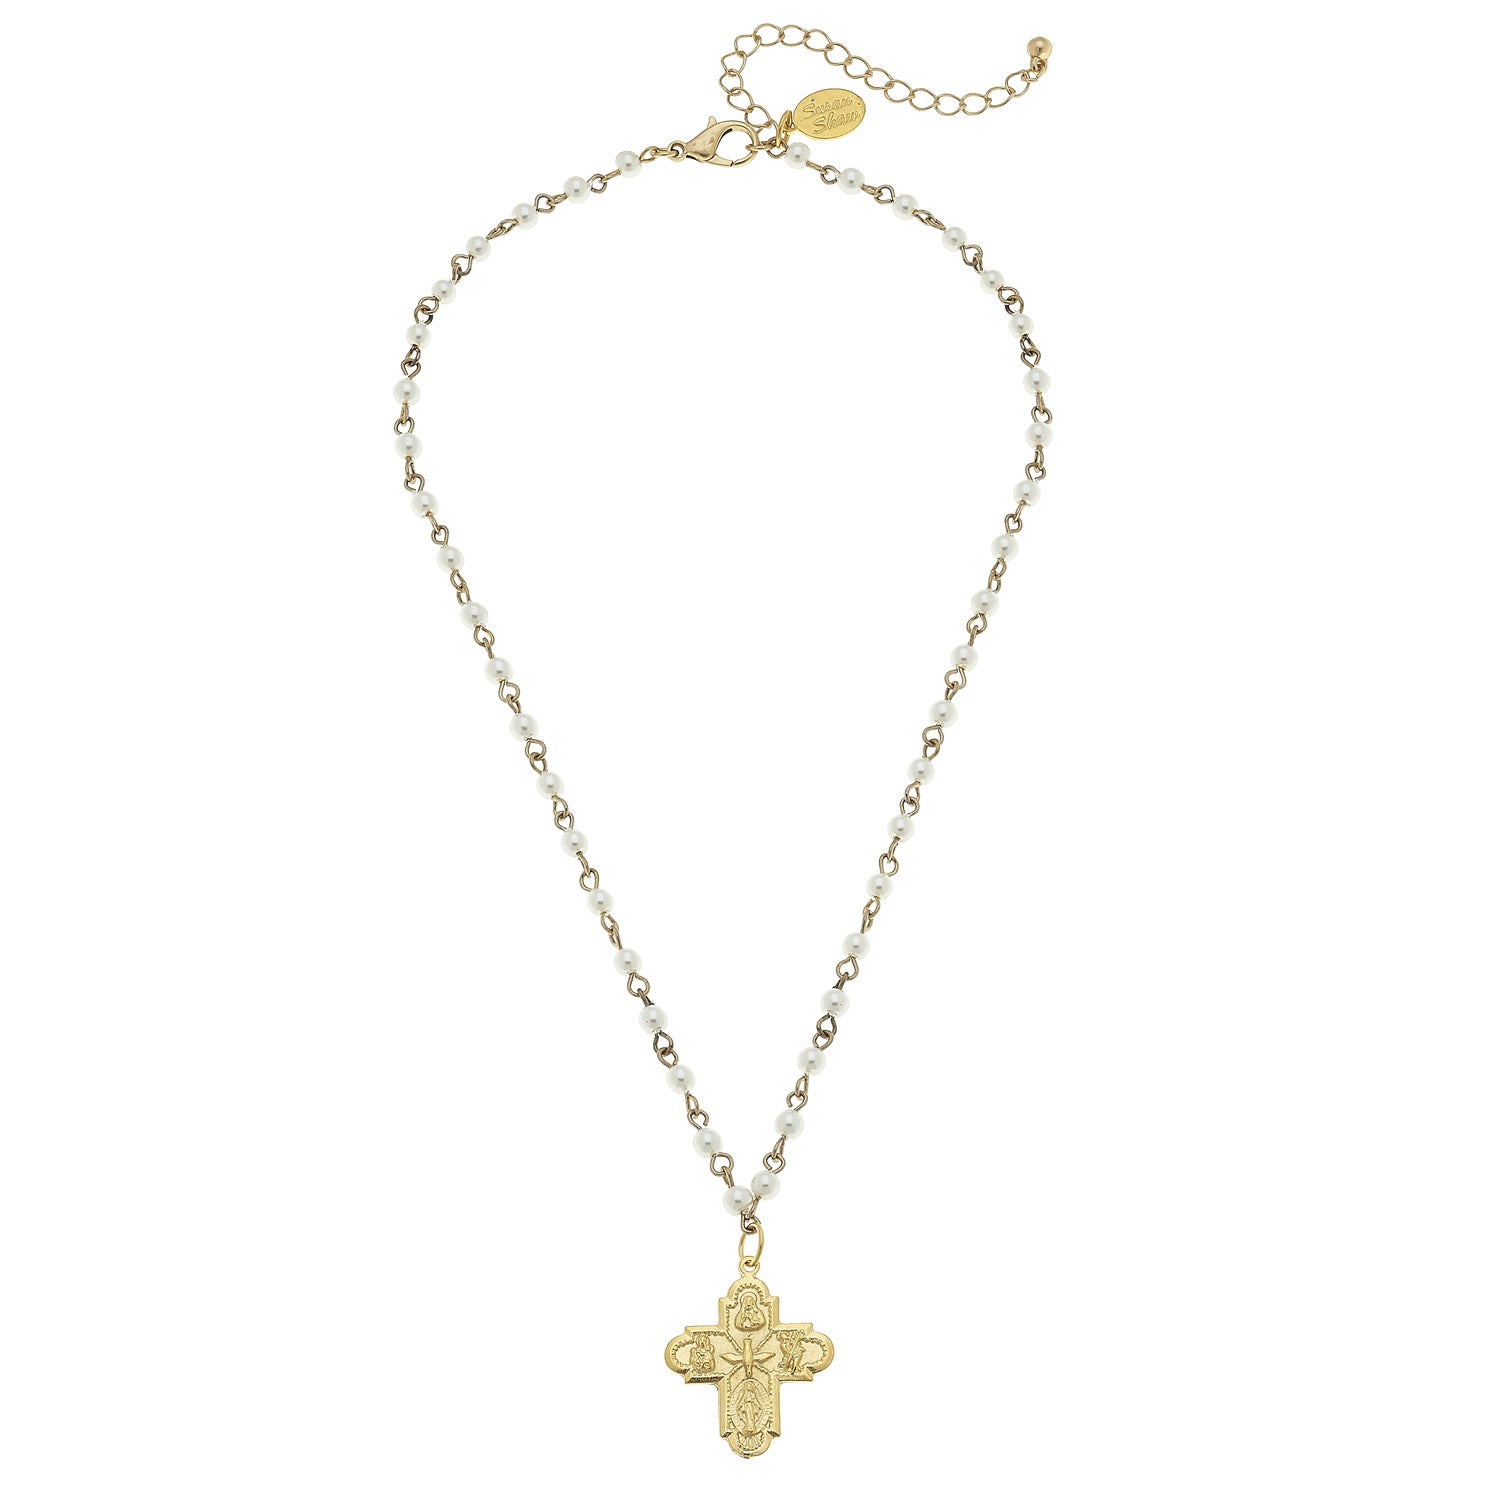 Susan Shaw Textured Cross Pendant on Beaded Gold Chain Necklace